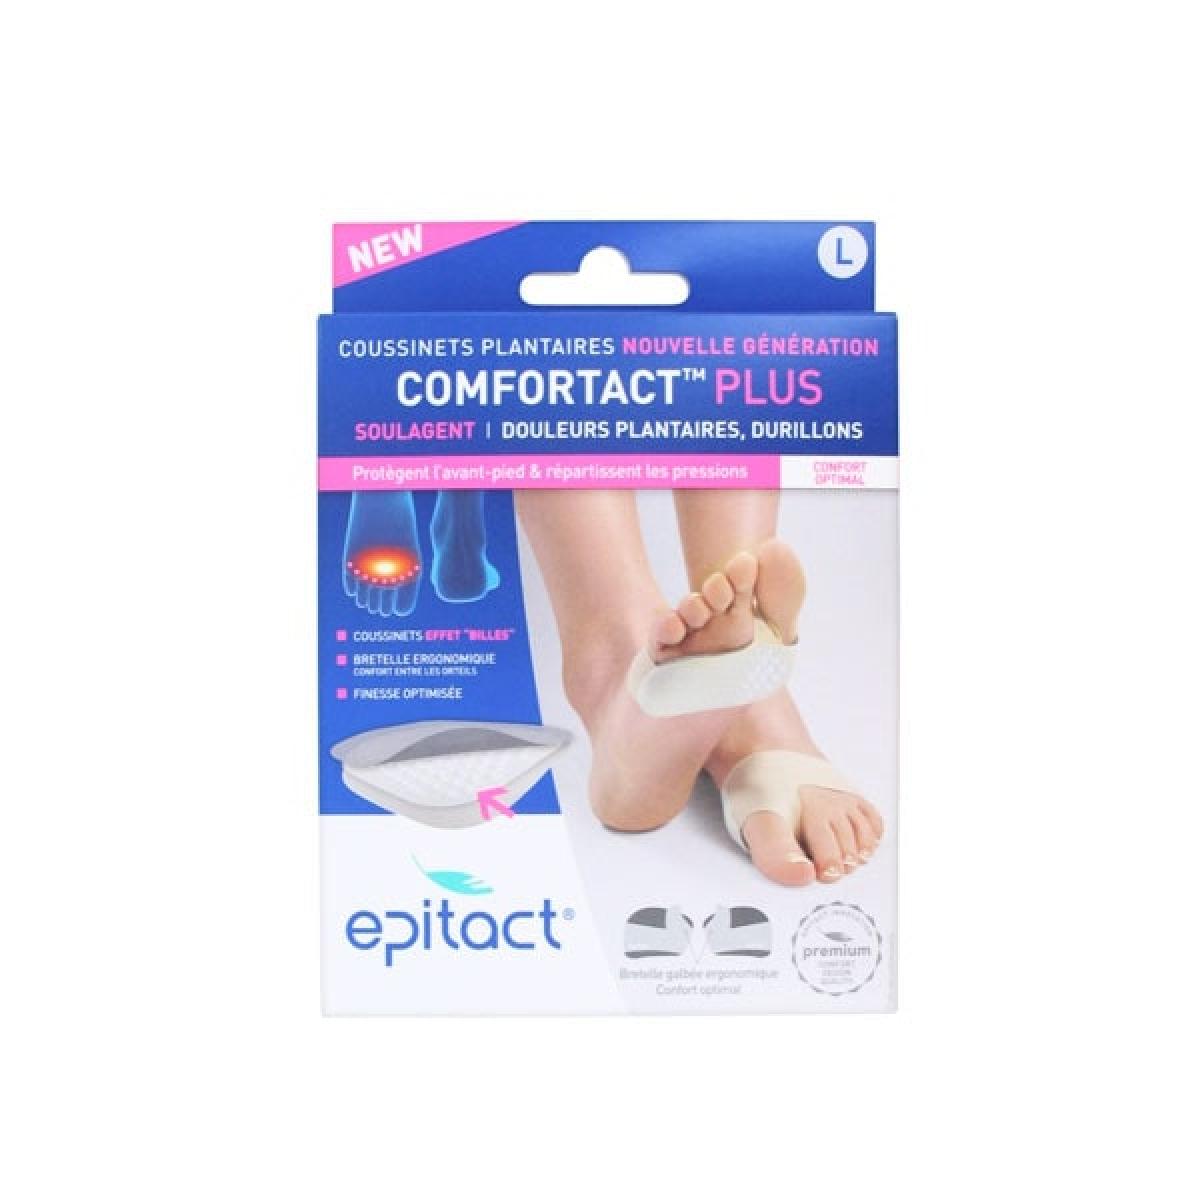 EPITACT Coussinets comfortact plus taille L 1 paire